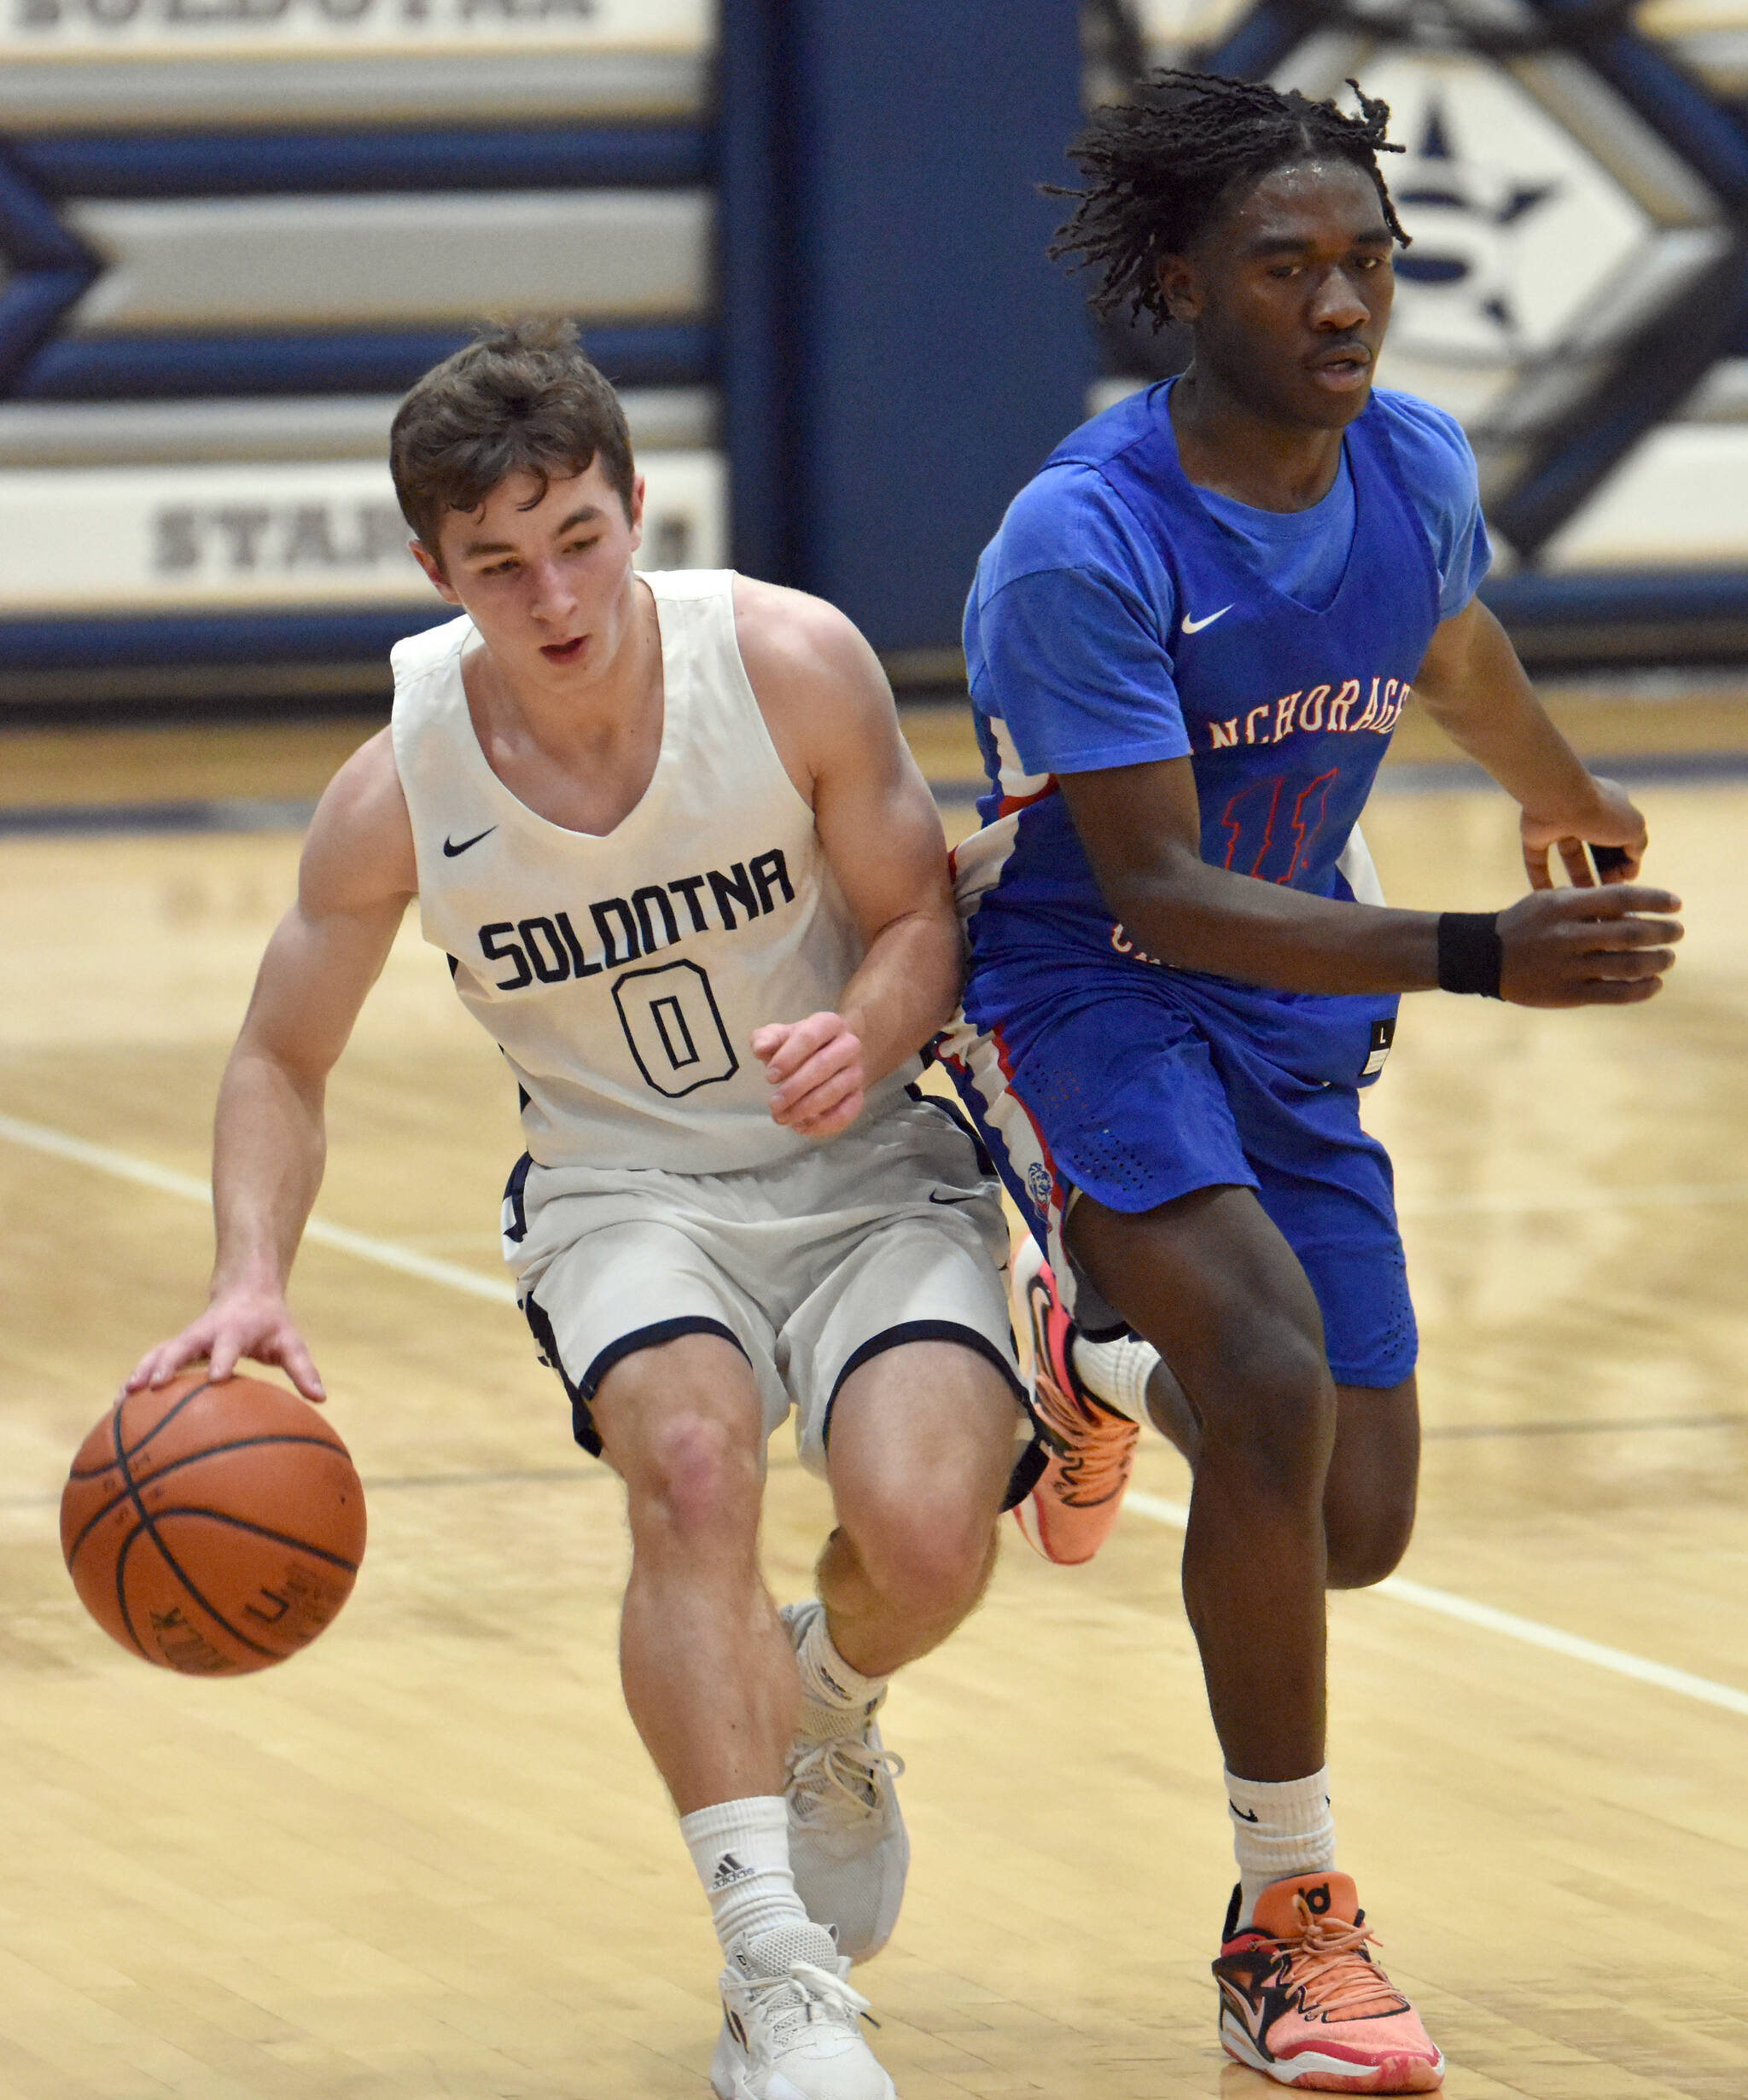 Soldotna’s Zac Buckbee brings the ball up under pressure from Darian Kwacho of Anchorage Christian Schools on Wednesday, Jan. 25, 2023, at Soldotna High School in Soldotna, Alaska. (Photo by Jeff Helminiak/Peninsula Clarion)